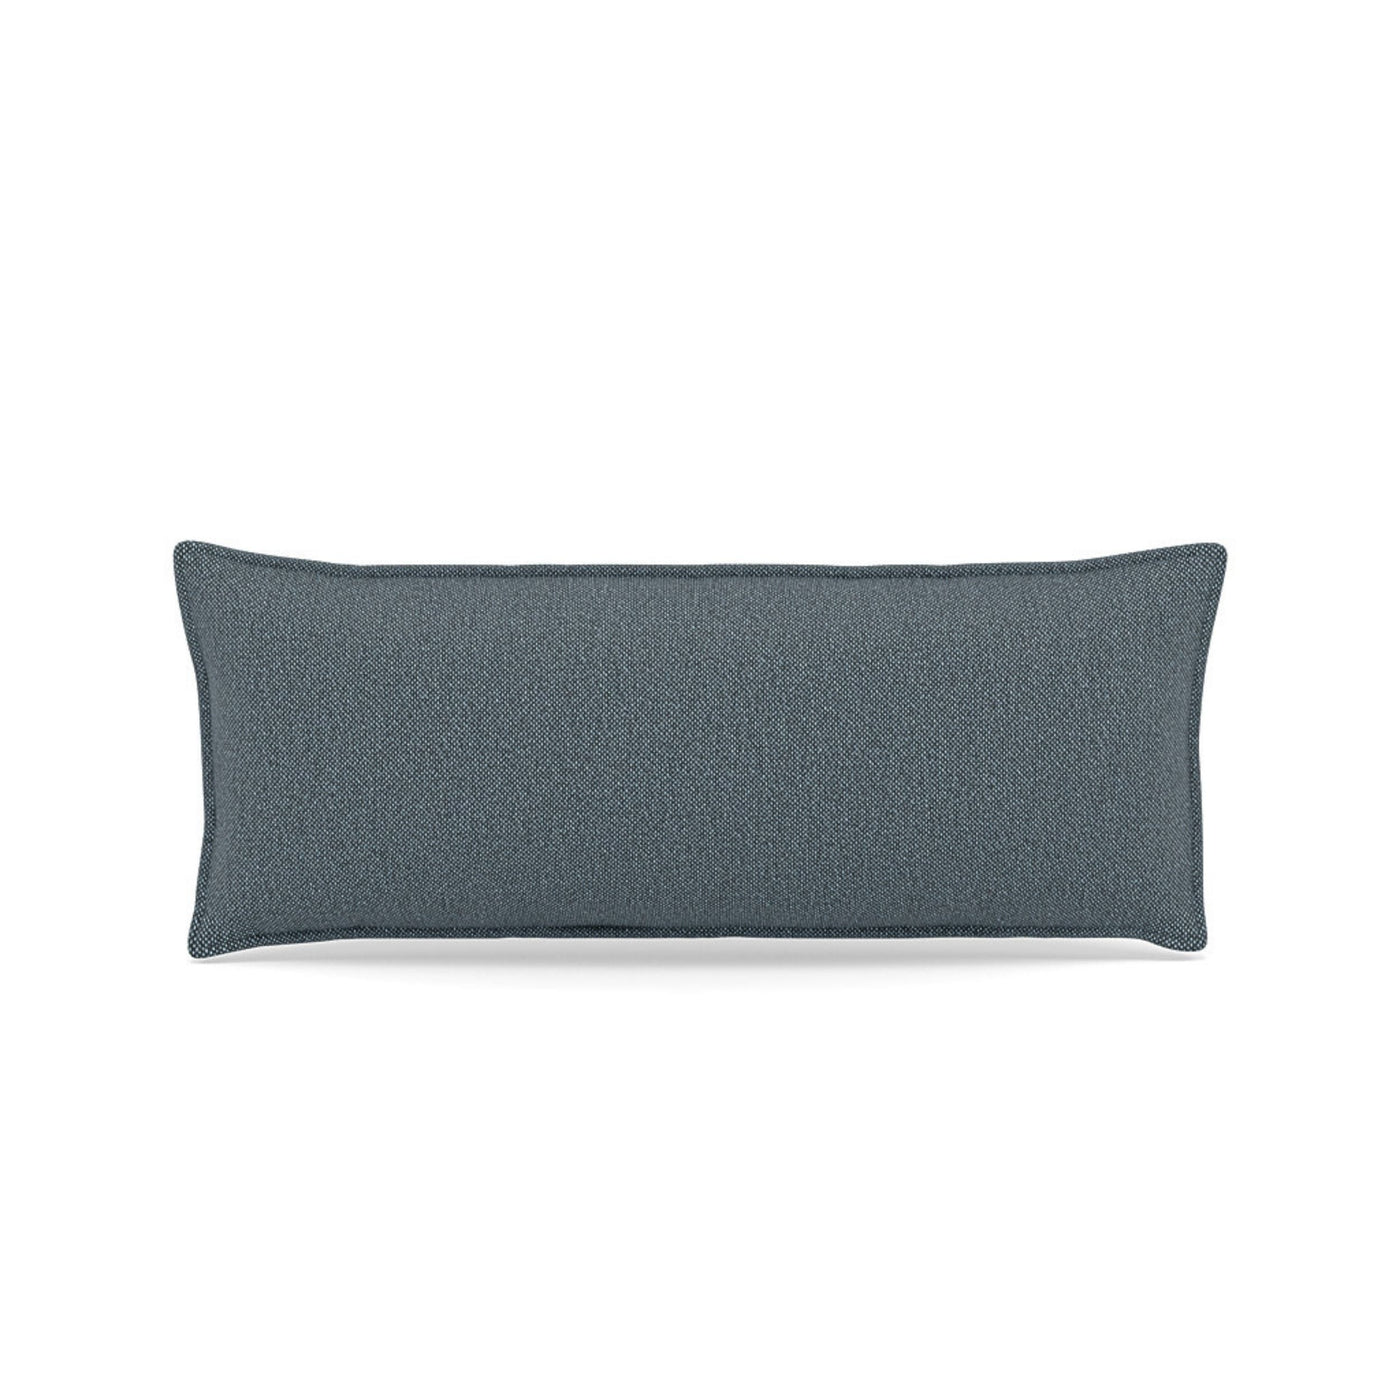 Muuto's In Situ Cushion for the In Situ Modular Sofa series in clay 1, 70x30cm. Made to order from someday designs.. #colour_clay-1-blue